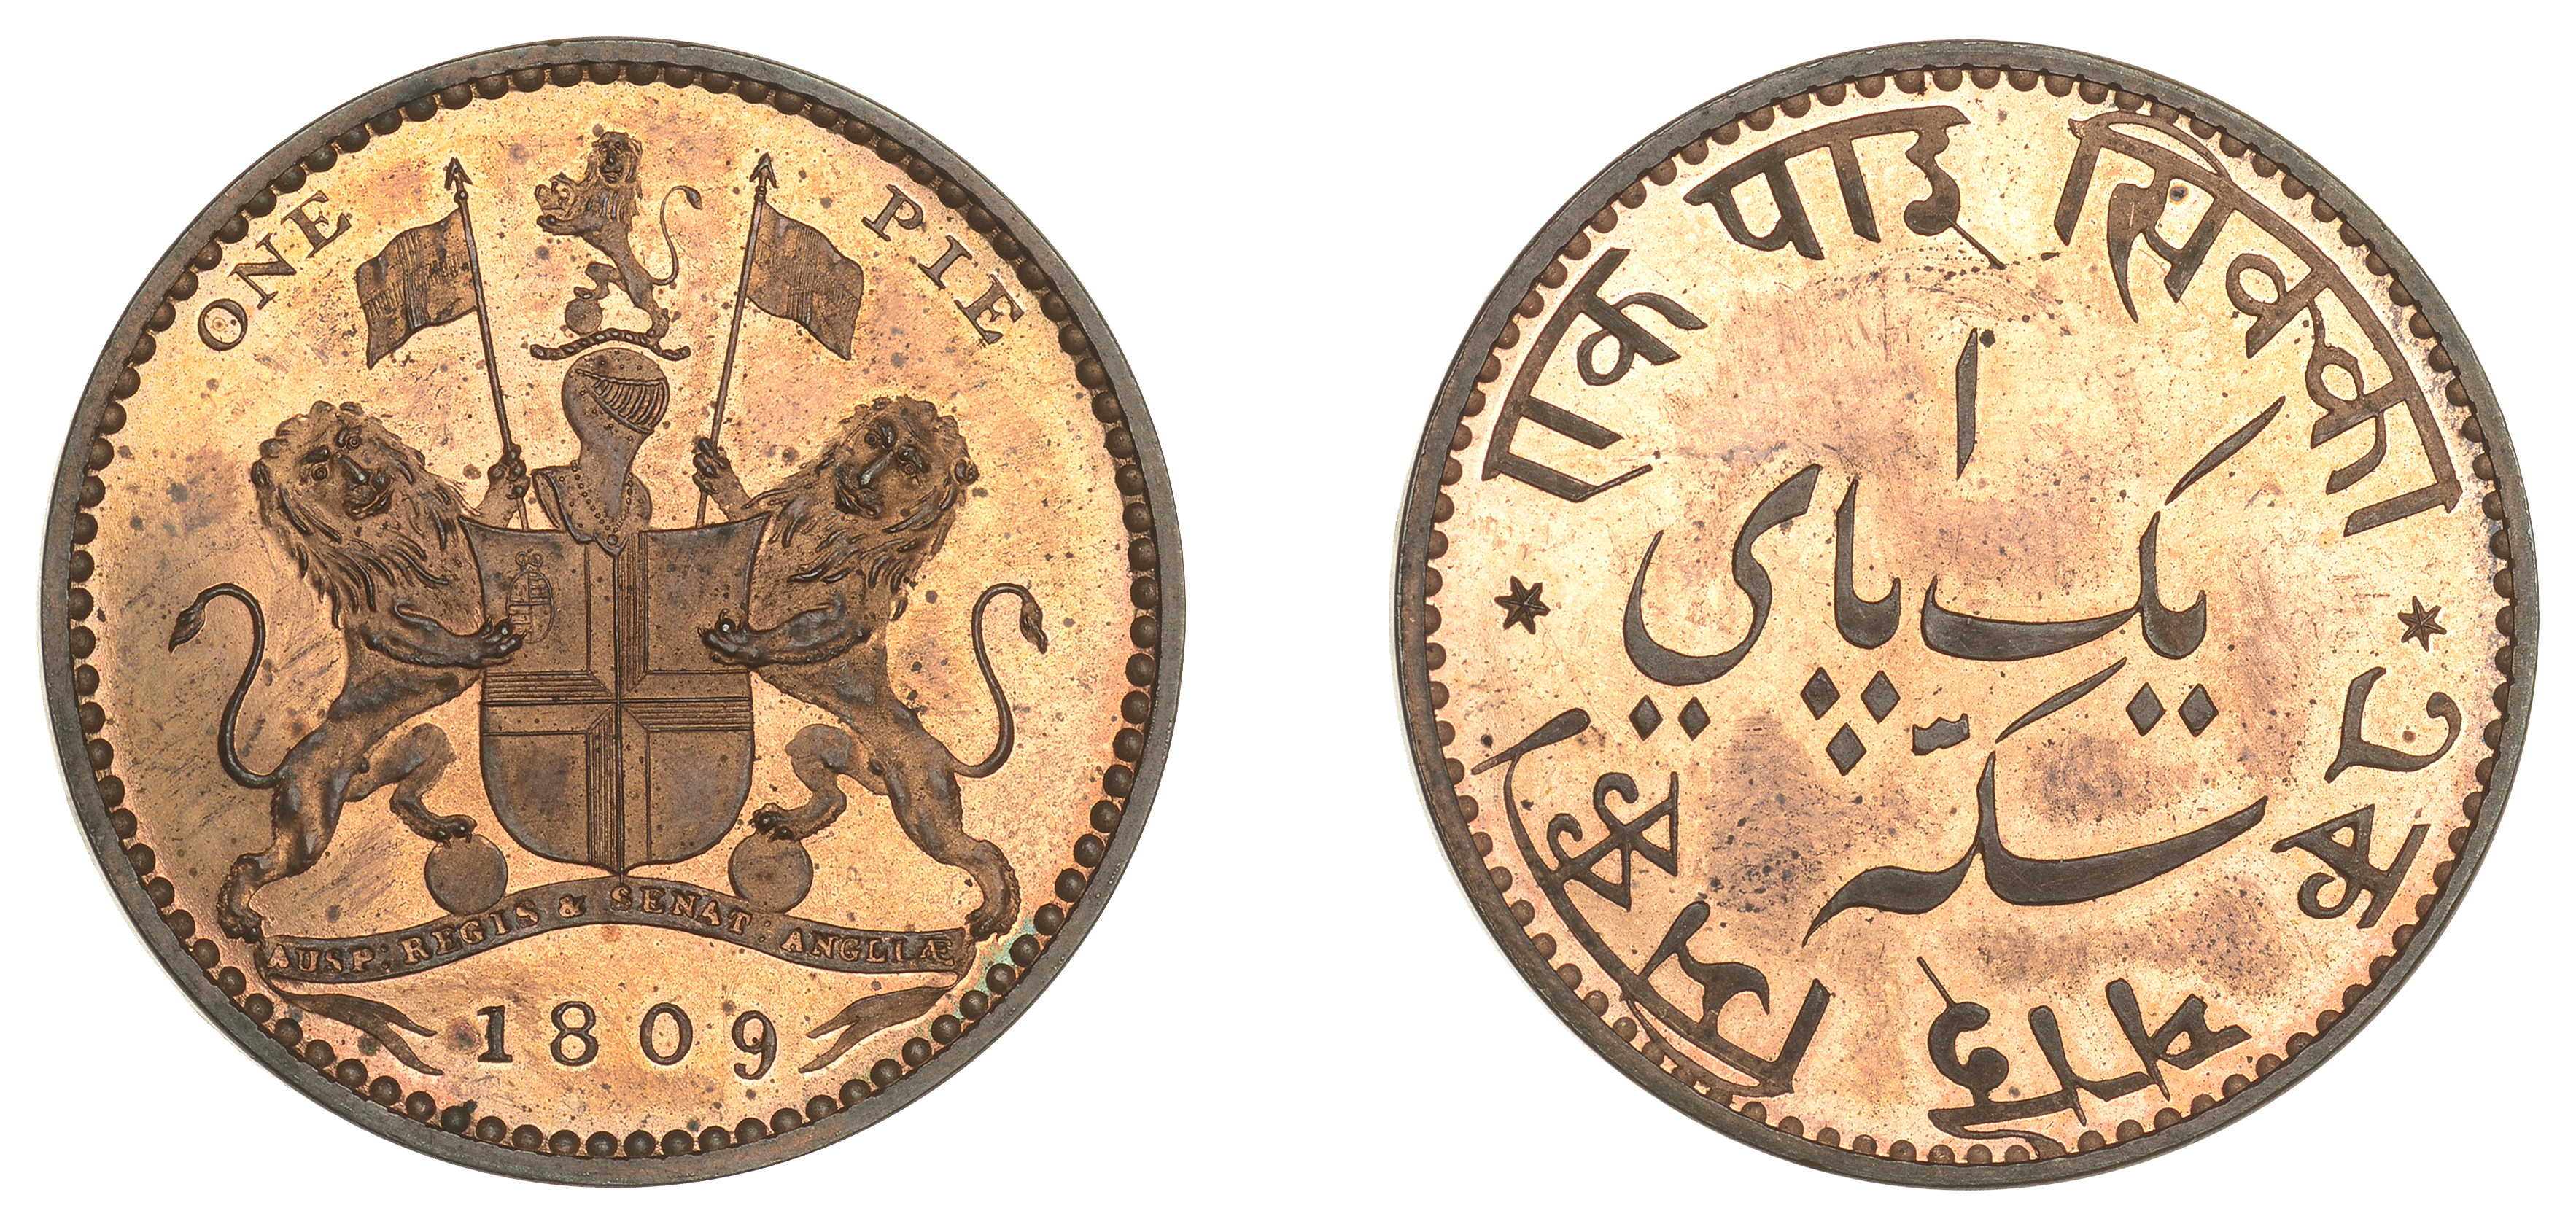 East India Company, Bengal Presidency, European Minting, Soho, copper Pattern Pie, 1809, uns...